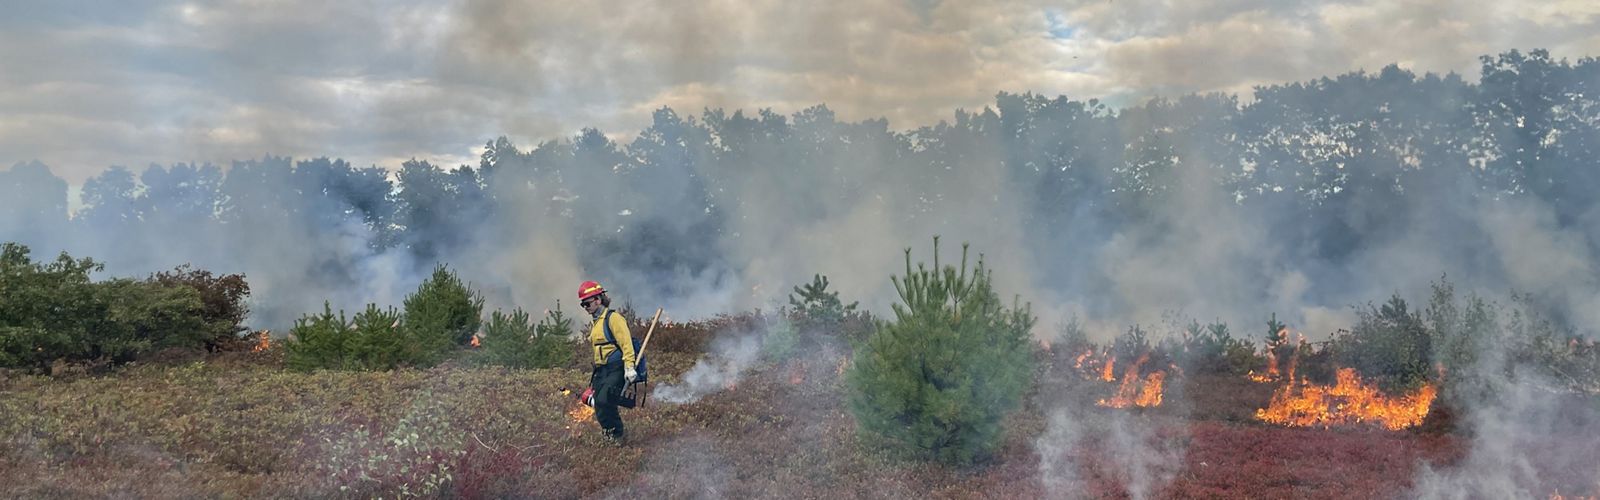 A person wearing fire-protective gear walks away from vegetation that is burning during a prescribed fire.